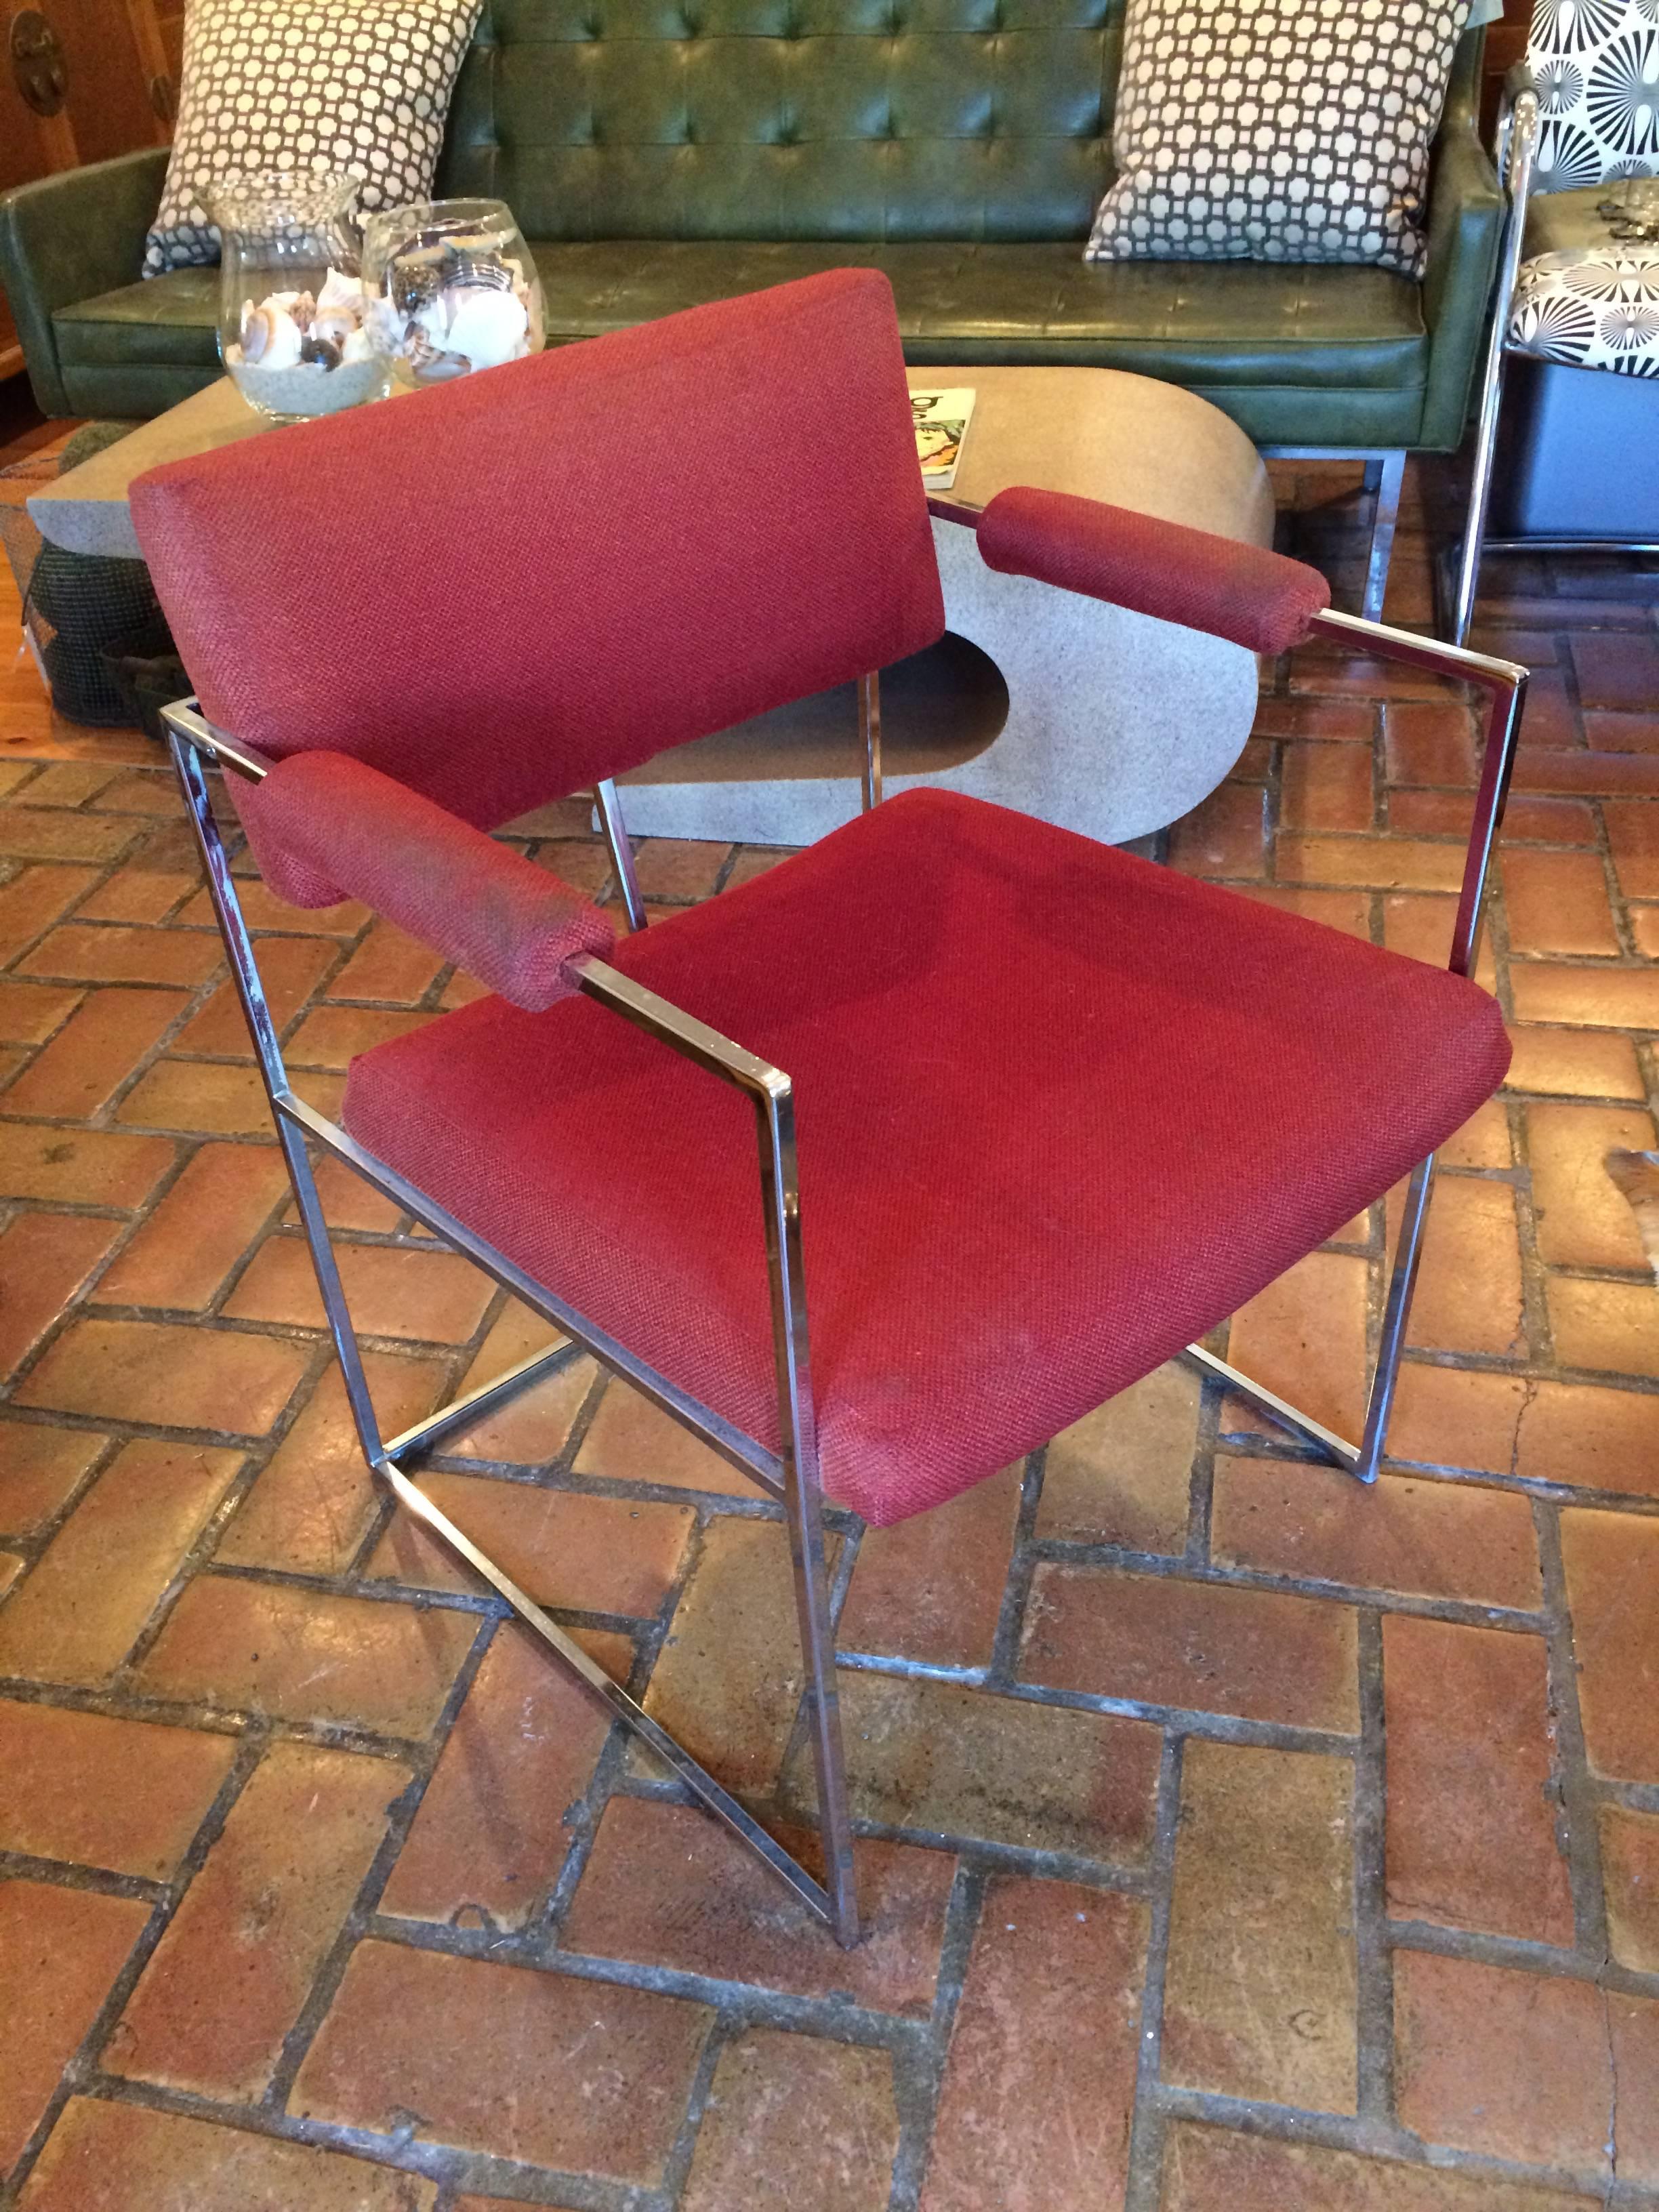 Classic chrome Milo Baughman for Thayer Coggin chair covered in its original fabric, a maroon wool blend with a square flat tubing. Could use a recover. Great for home or office. Possibly style No .8100.